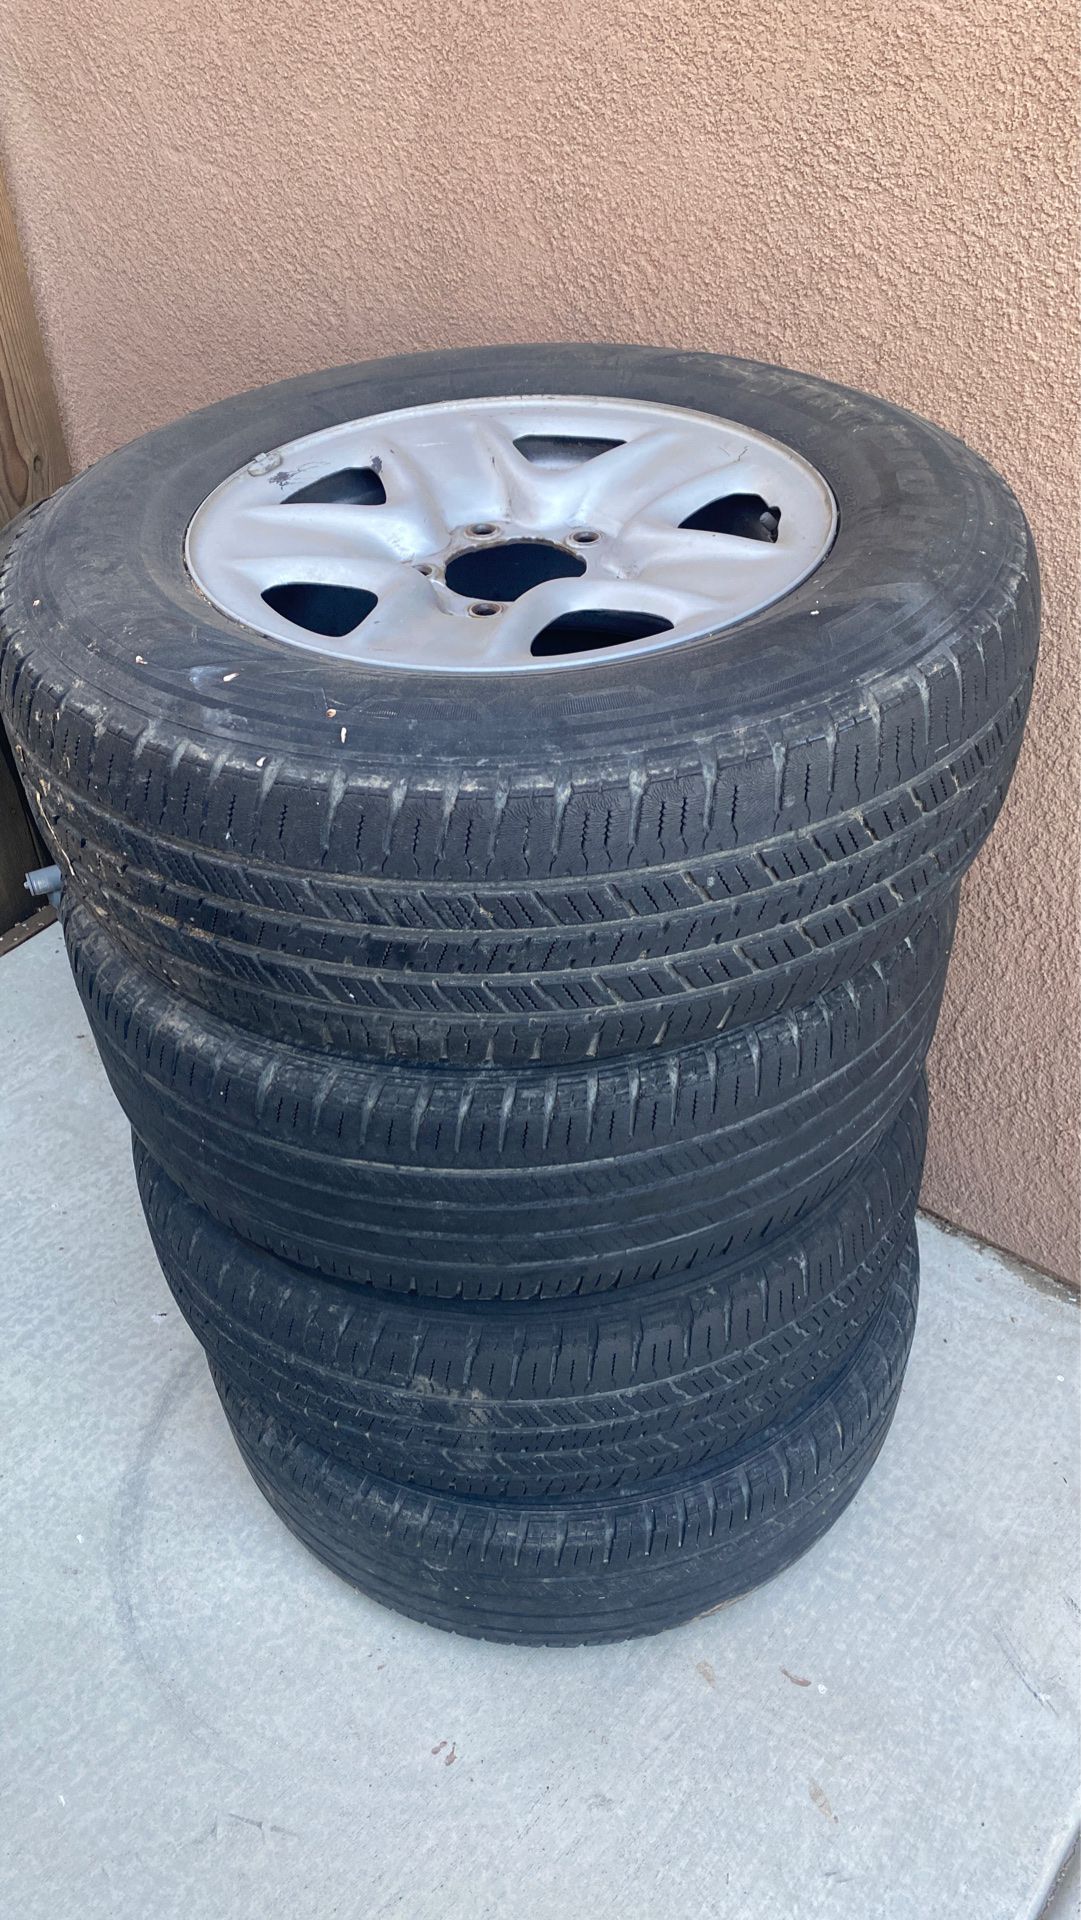 Free wheels and tires